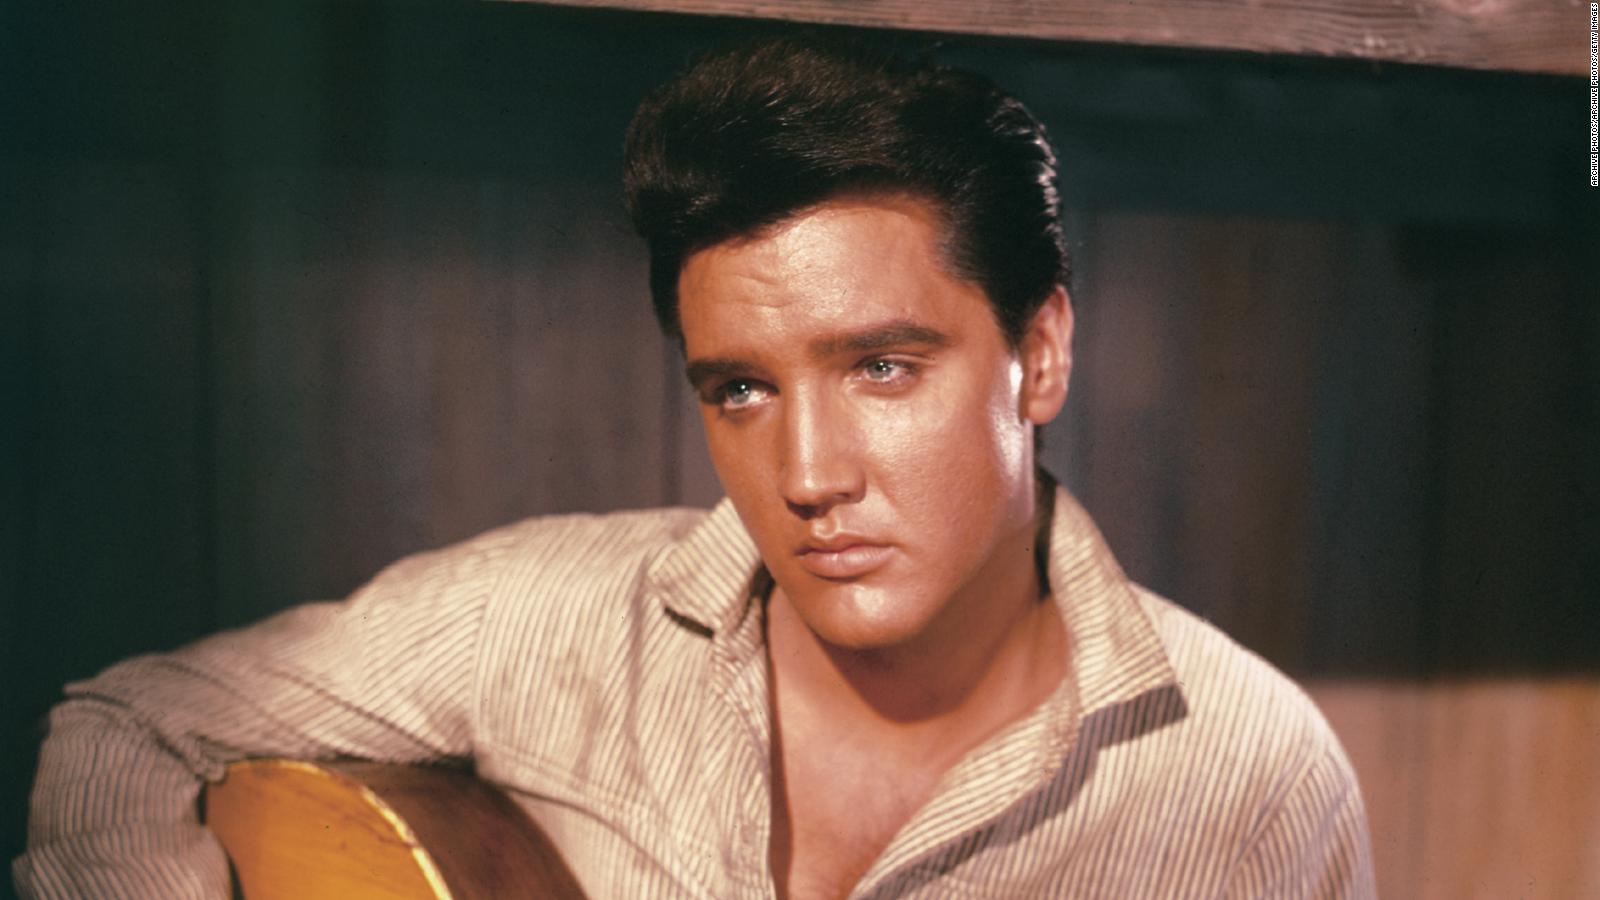 Elvis Presley birthday: 8 things you may not know about the singer - CNN